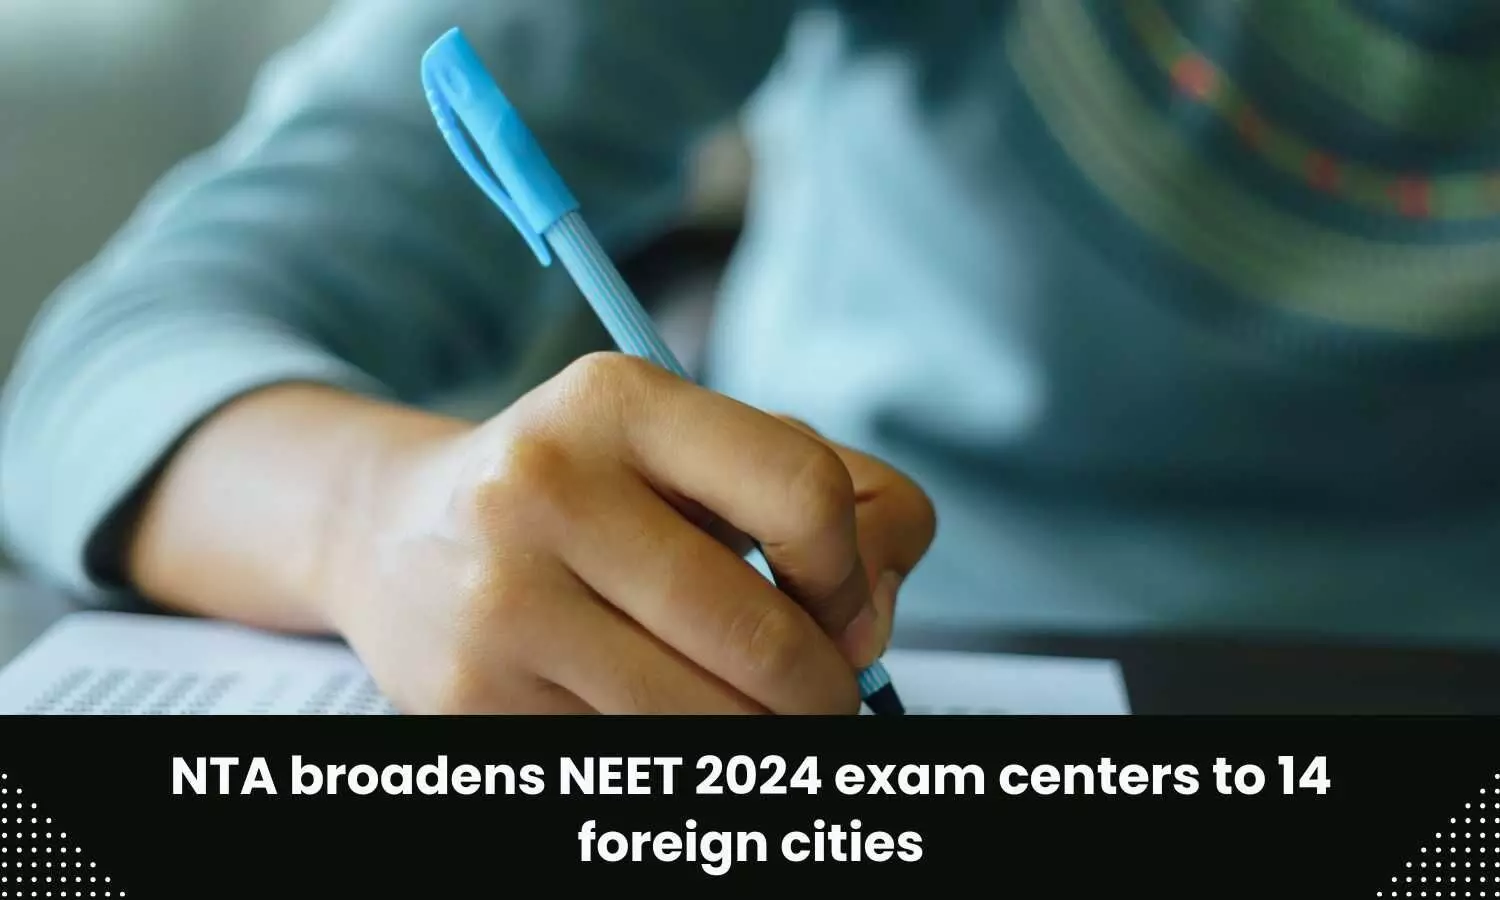 14 foreign cities added to NEET 2024 exam centers